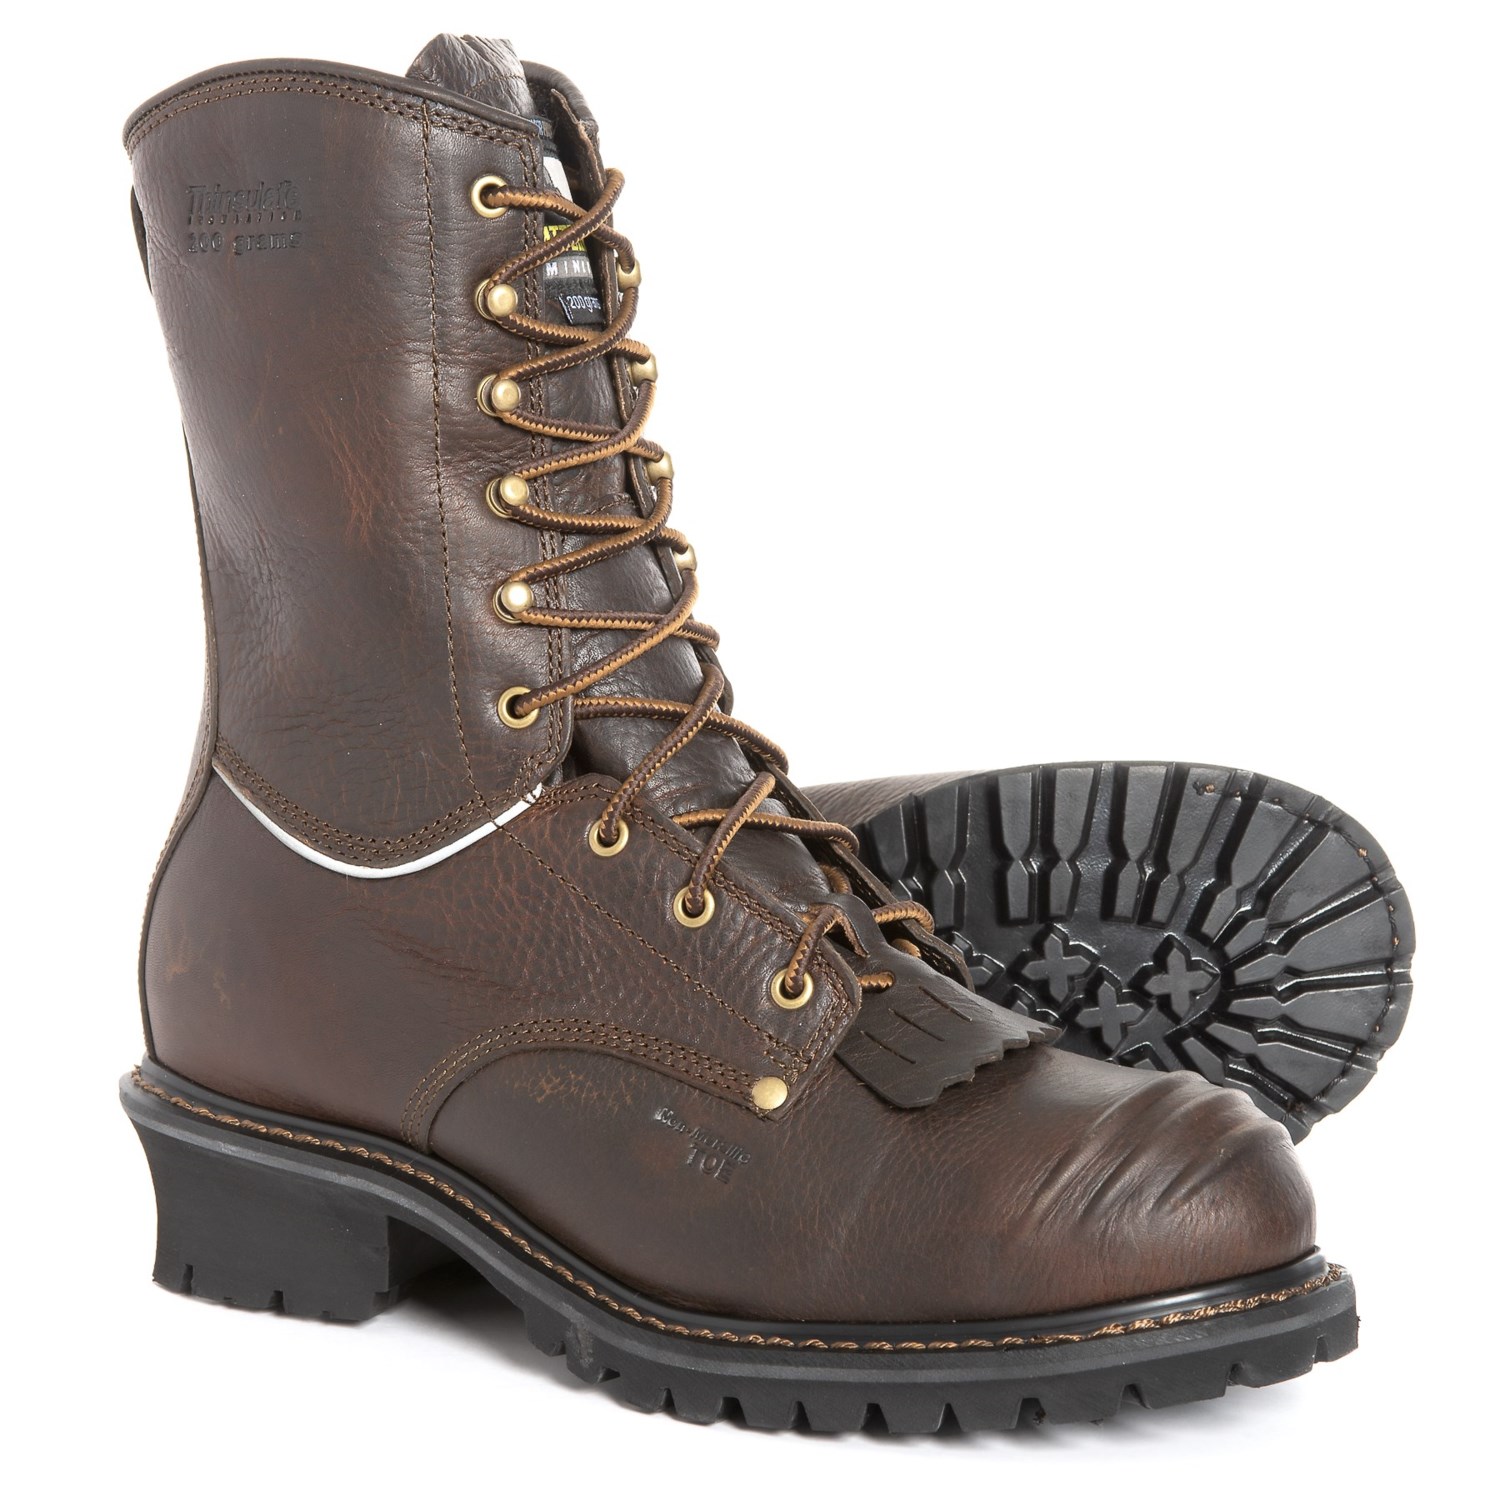 composite safety boots